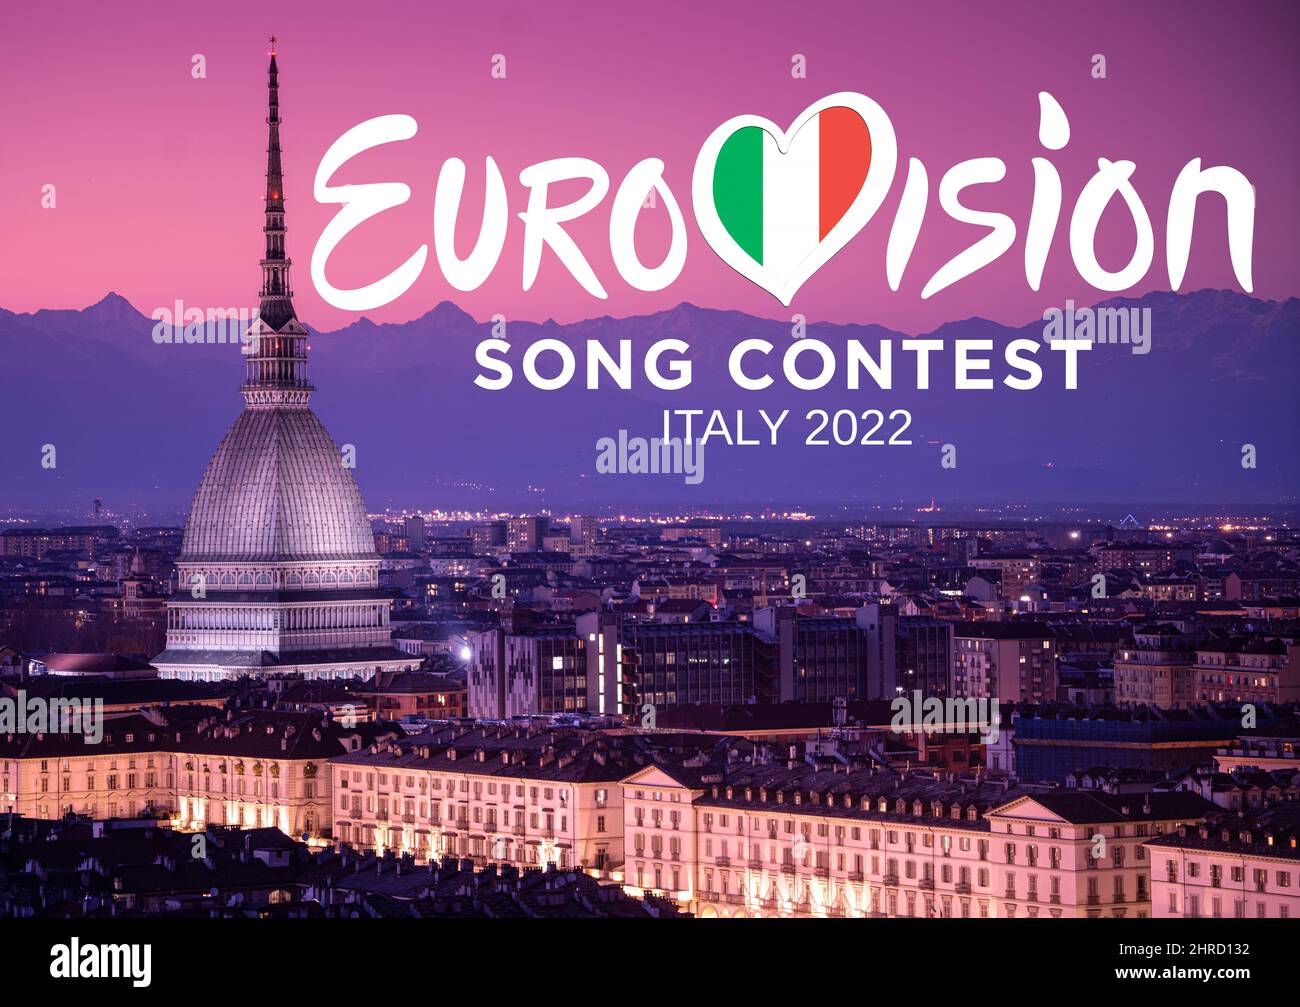 Eurovision Song Contest logo on on Turin's cityscape at night. The 66th edition will be held in Turin in May 2022. Turin, Italy - february 2022 Stock Photo